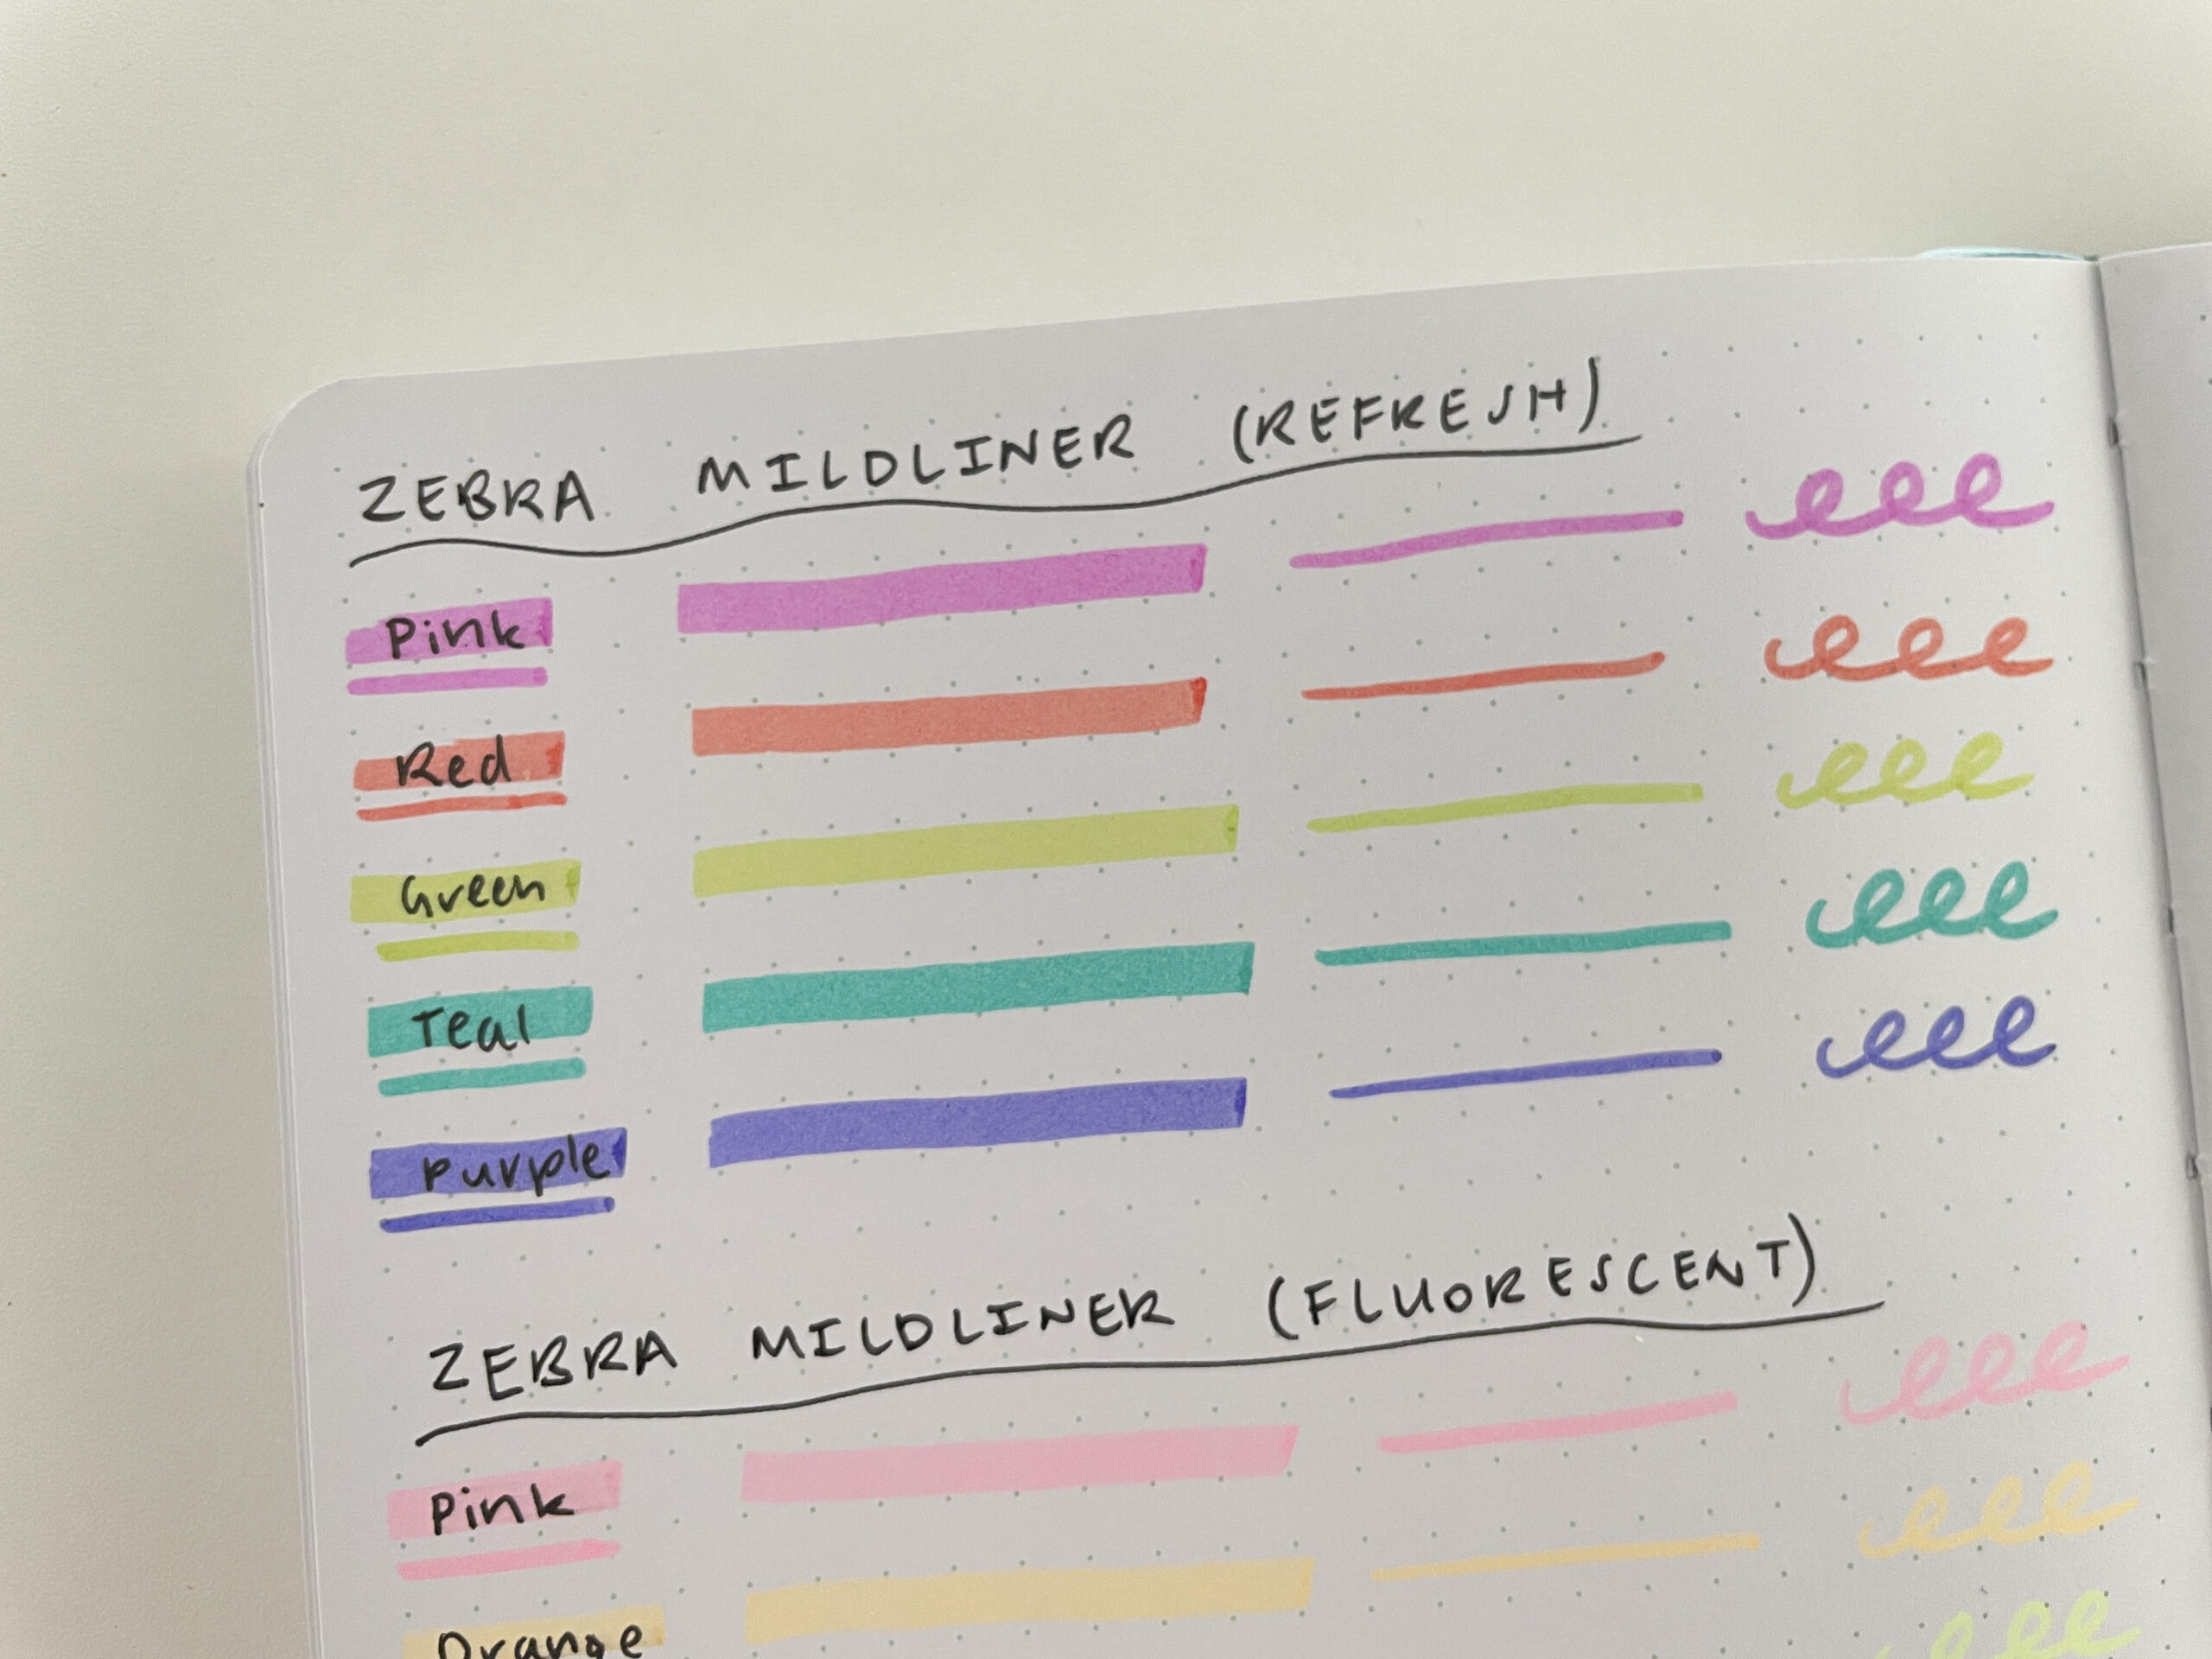 zebra mildliners review dual ended highlighters rainbow bright colors seqes notebook 160gsm paper testing ghosting bleed through paper quality